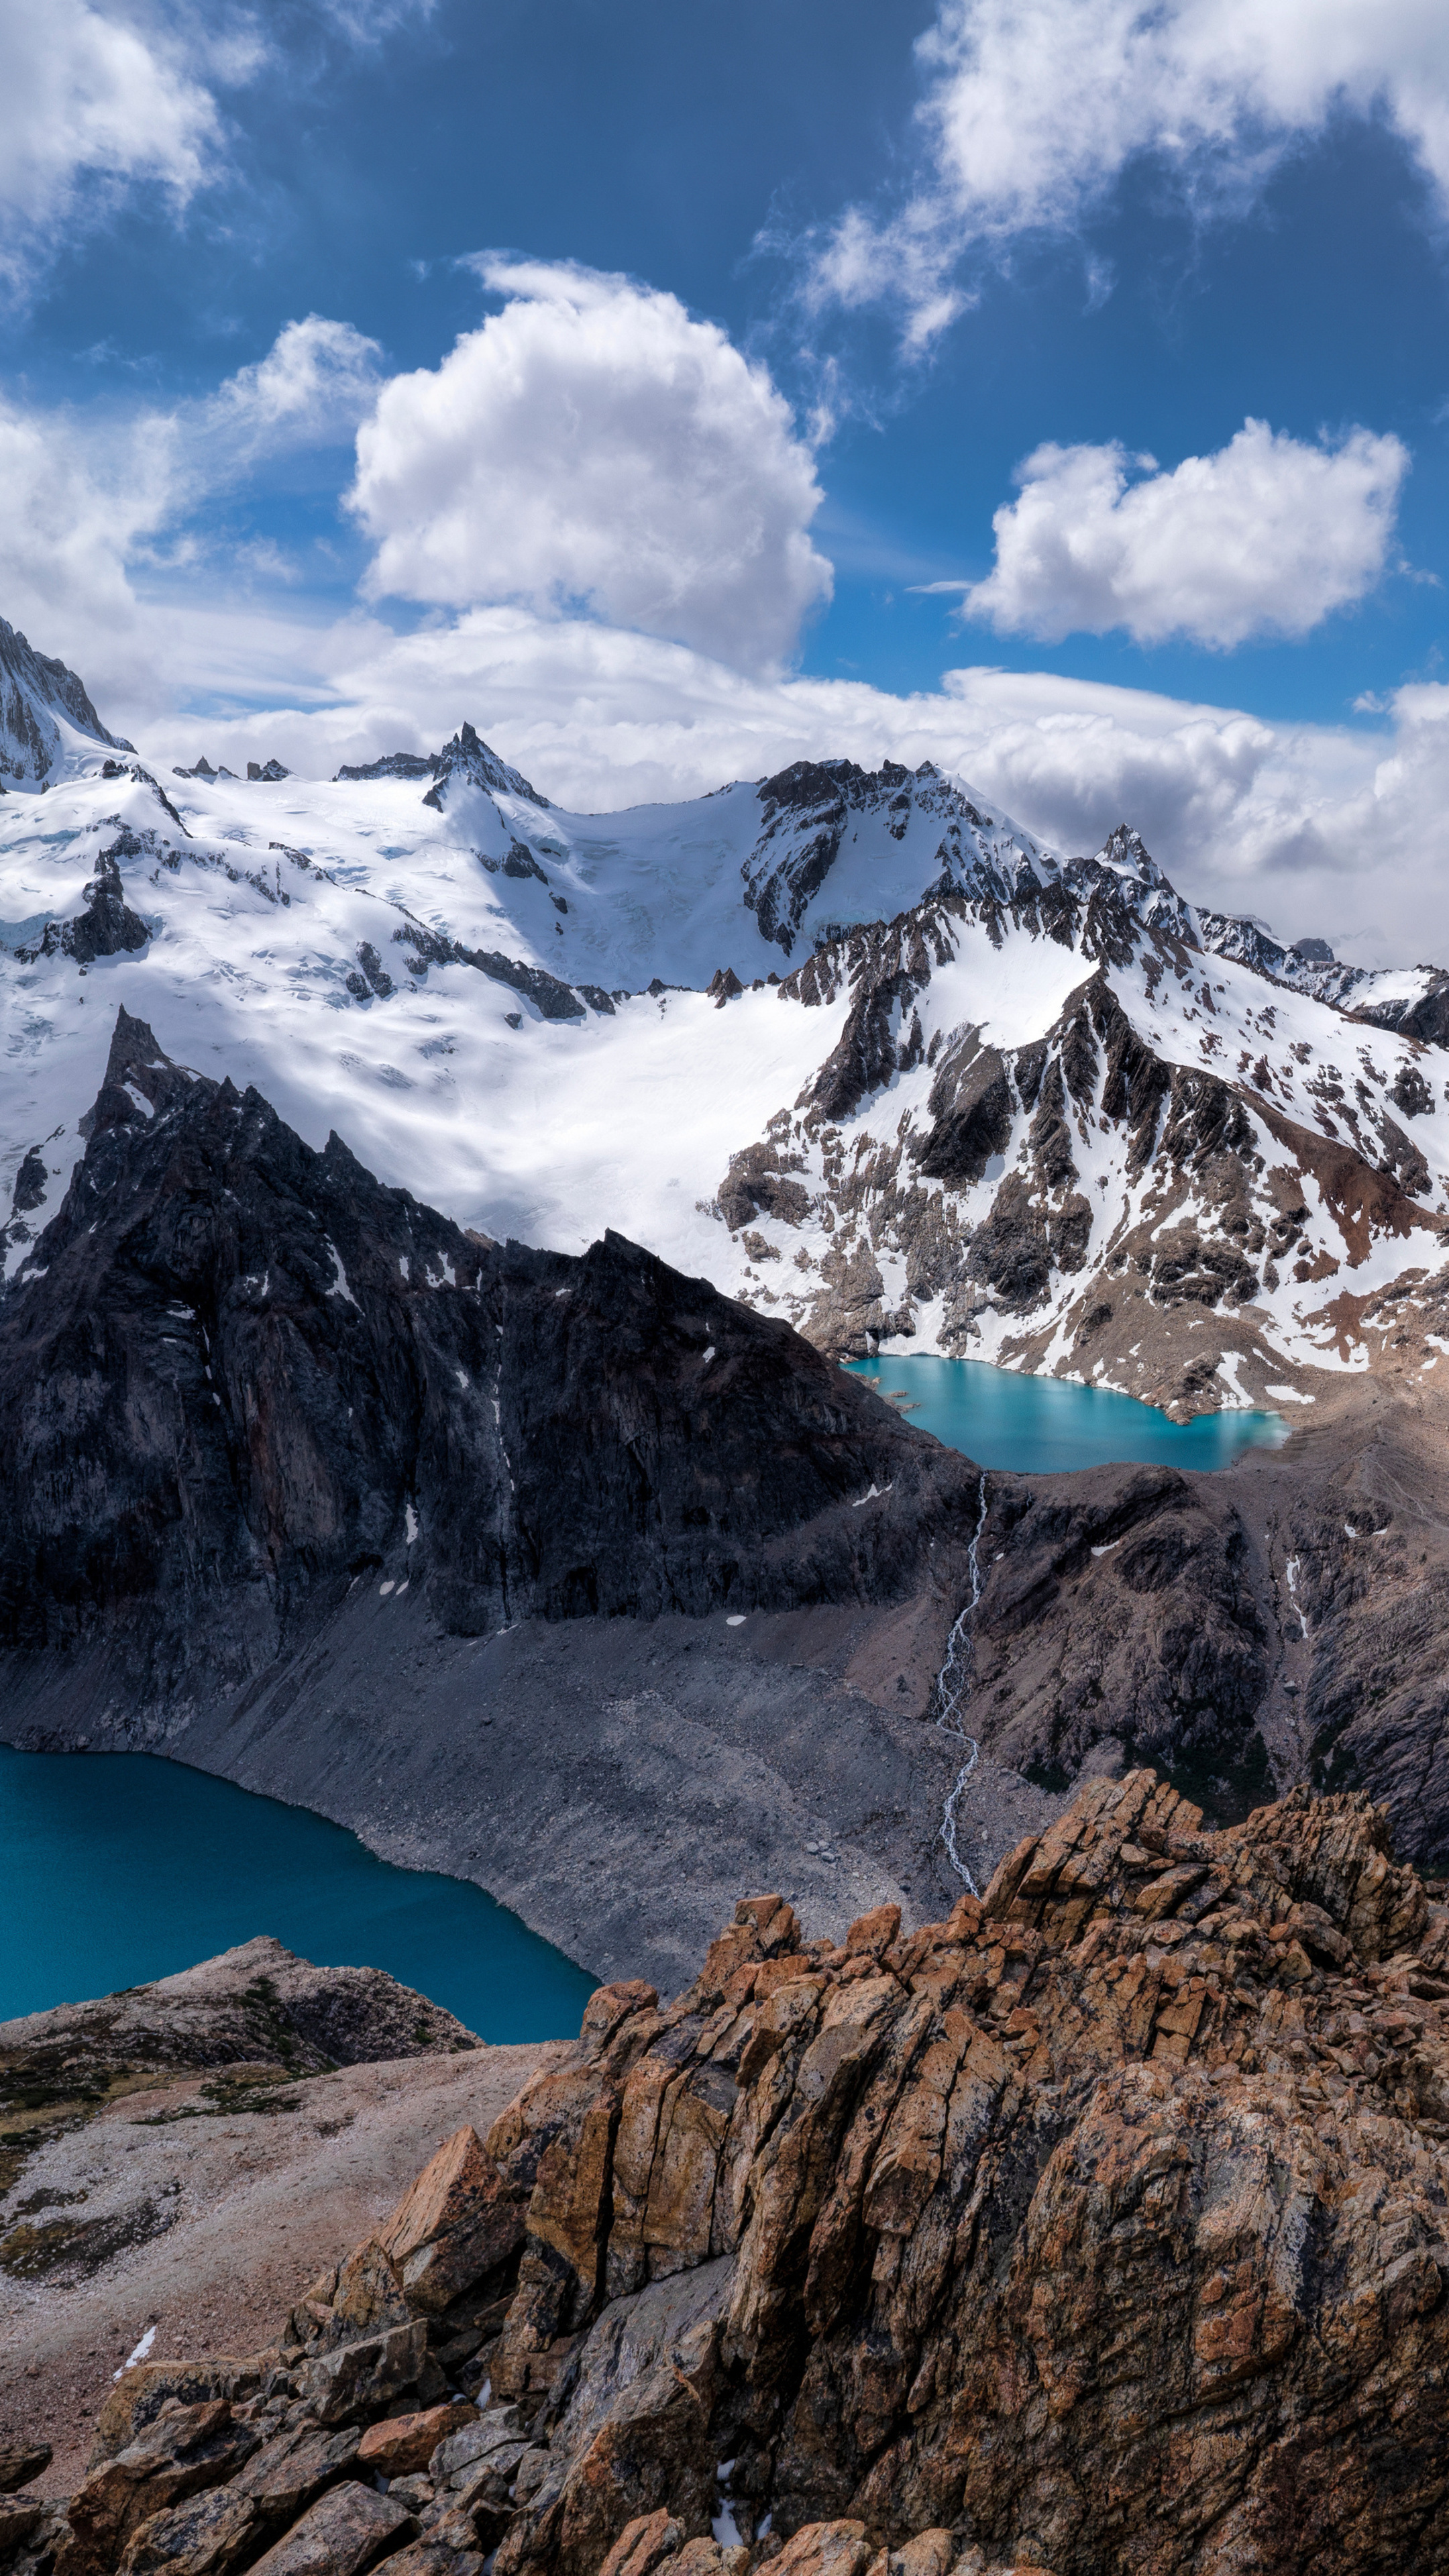 Argentina: Mountains, The country shares the bulk of the Southern Cone with Chile to the west. 2160x3840 4K Wallpaper.